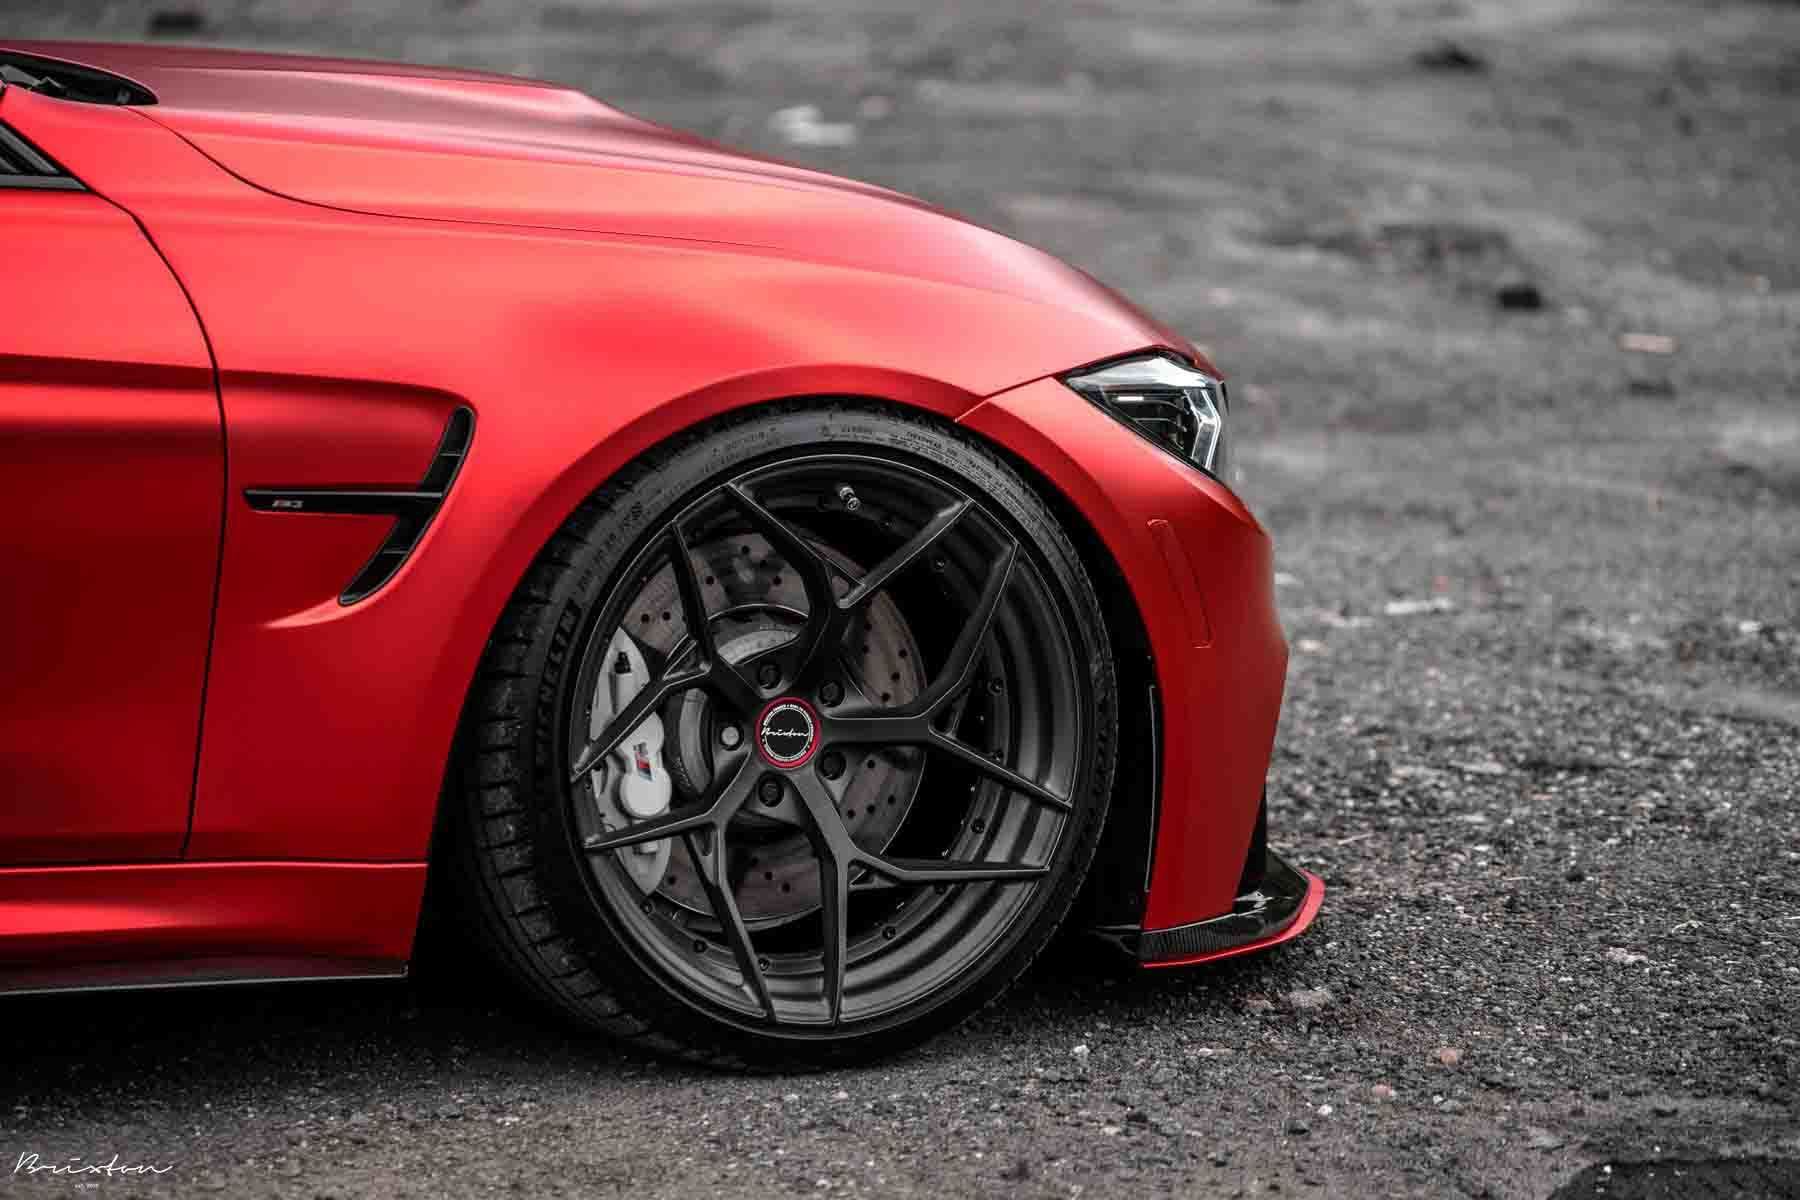 images-products-1-1788-232974076-red-bmw-f80-m3-brixton-forged-pf5-duo-series-forged-wheels-concave-20-brushed-smoke-black-7-1800.jpg